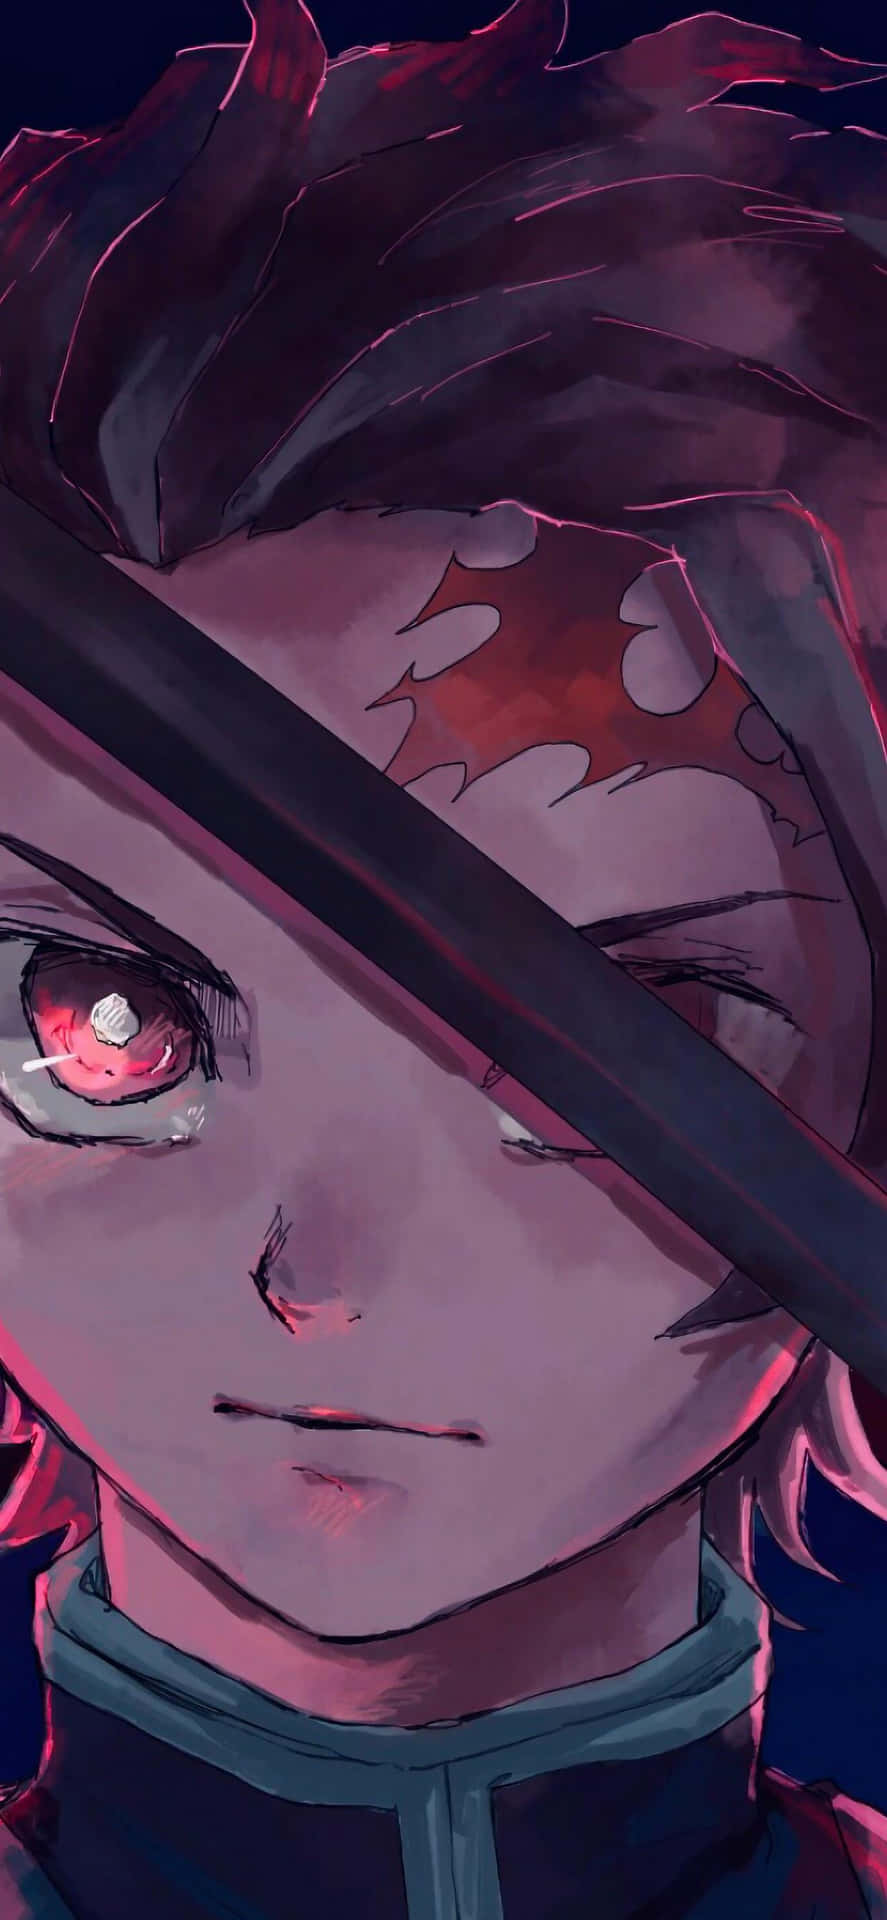 Unleash Your Inner Power with the Demon Slayer-Inspired iPhone 11 Wallpaper